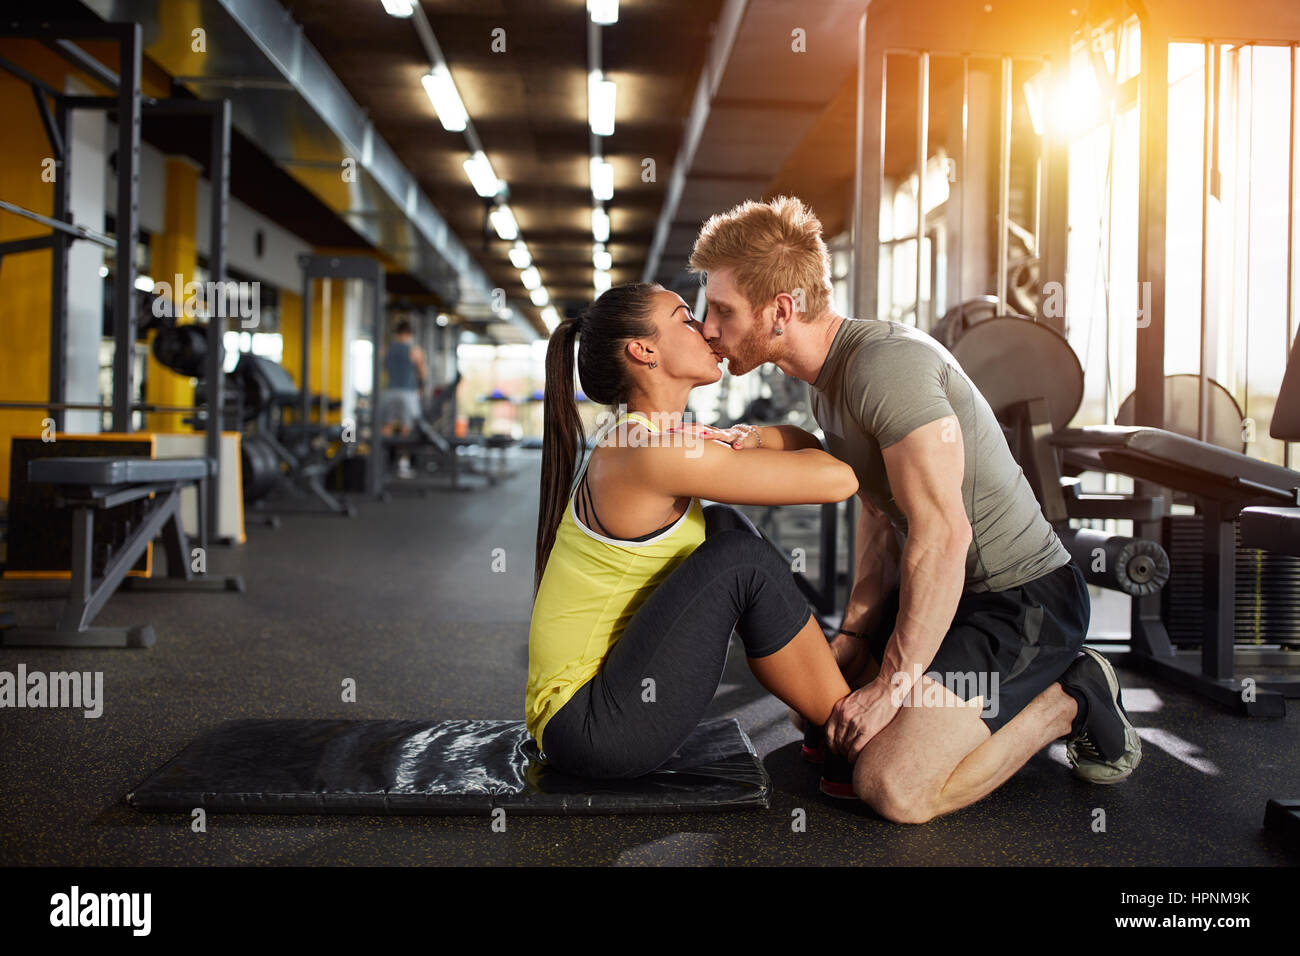 Kiss from fitness partner as prize for well done exercise Stock Photo